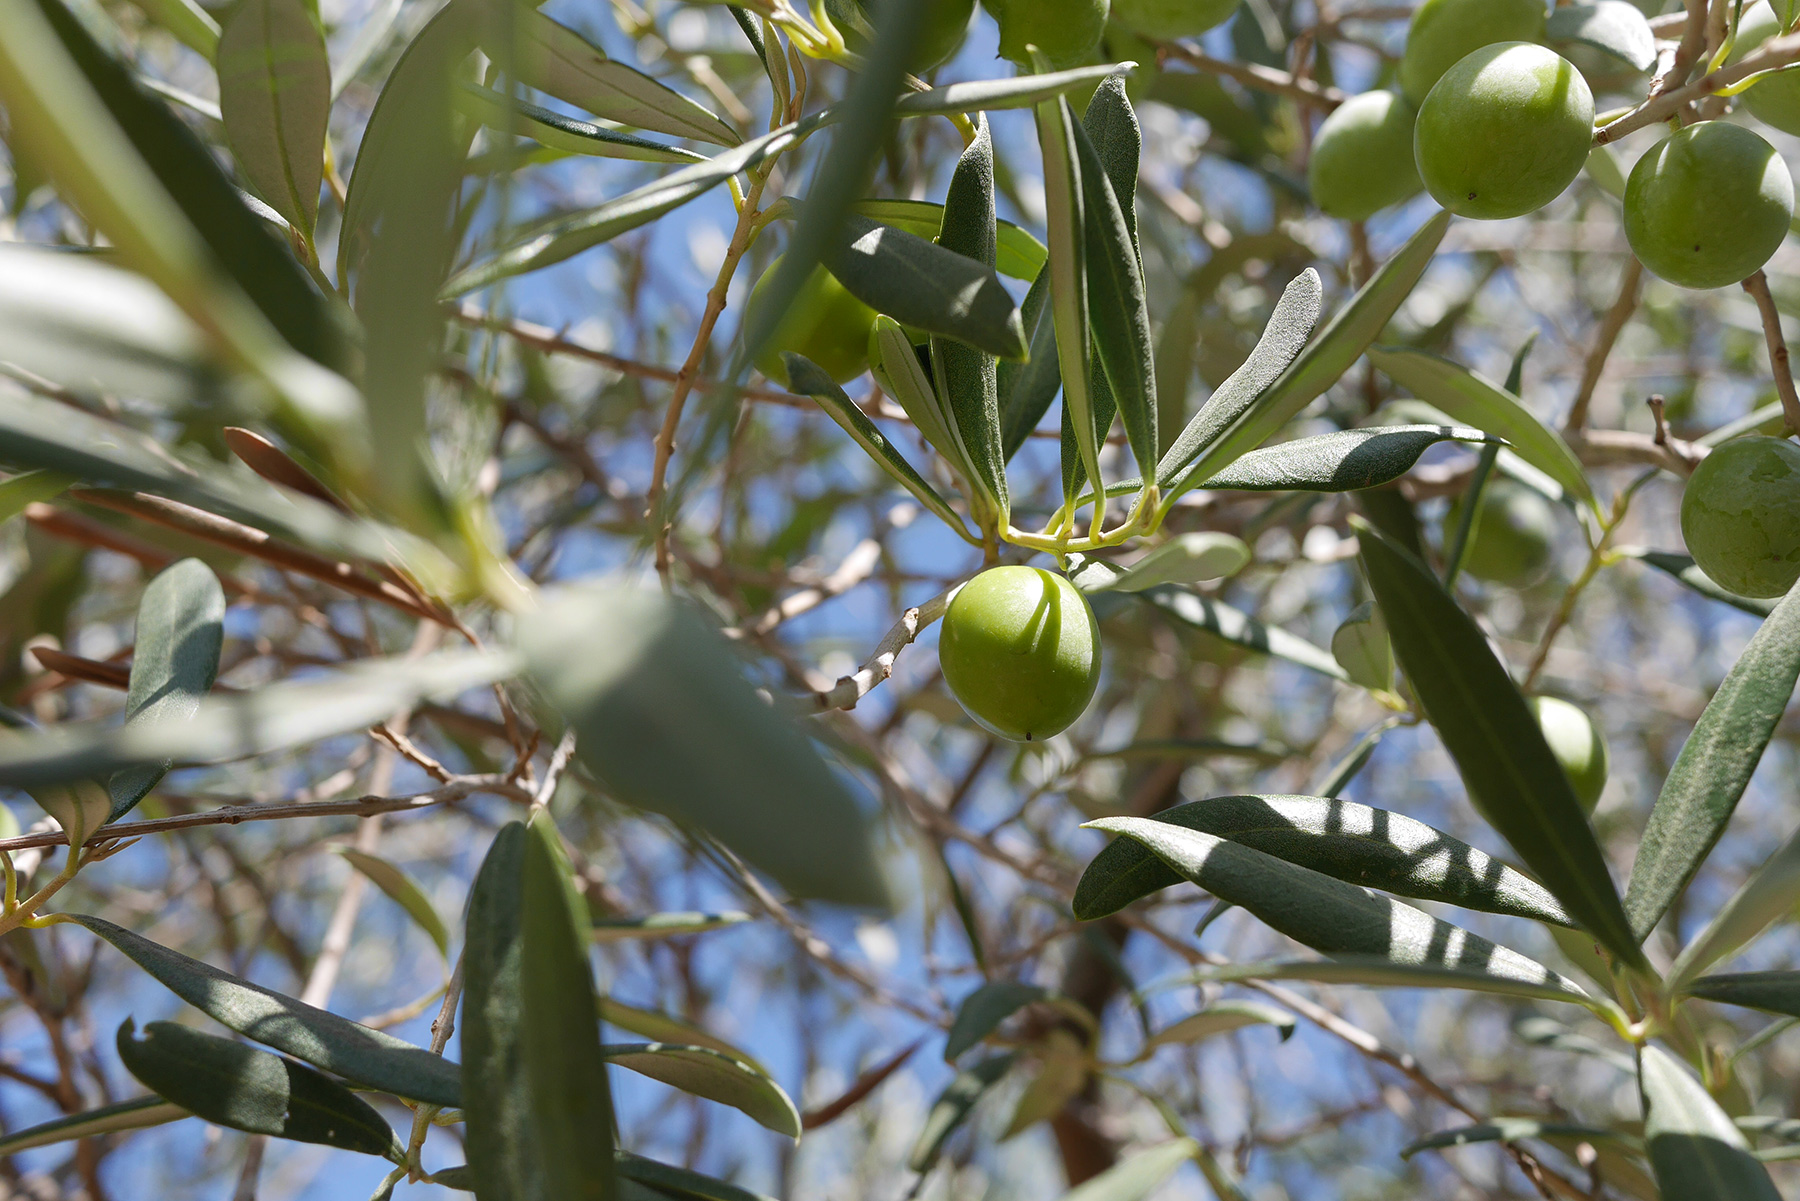 Are olives fruit or vegetable?